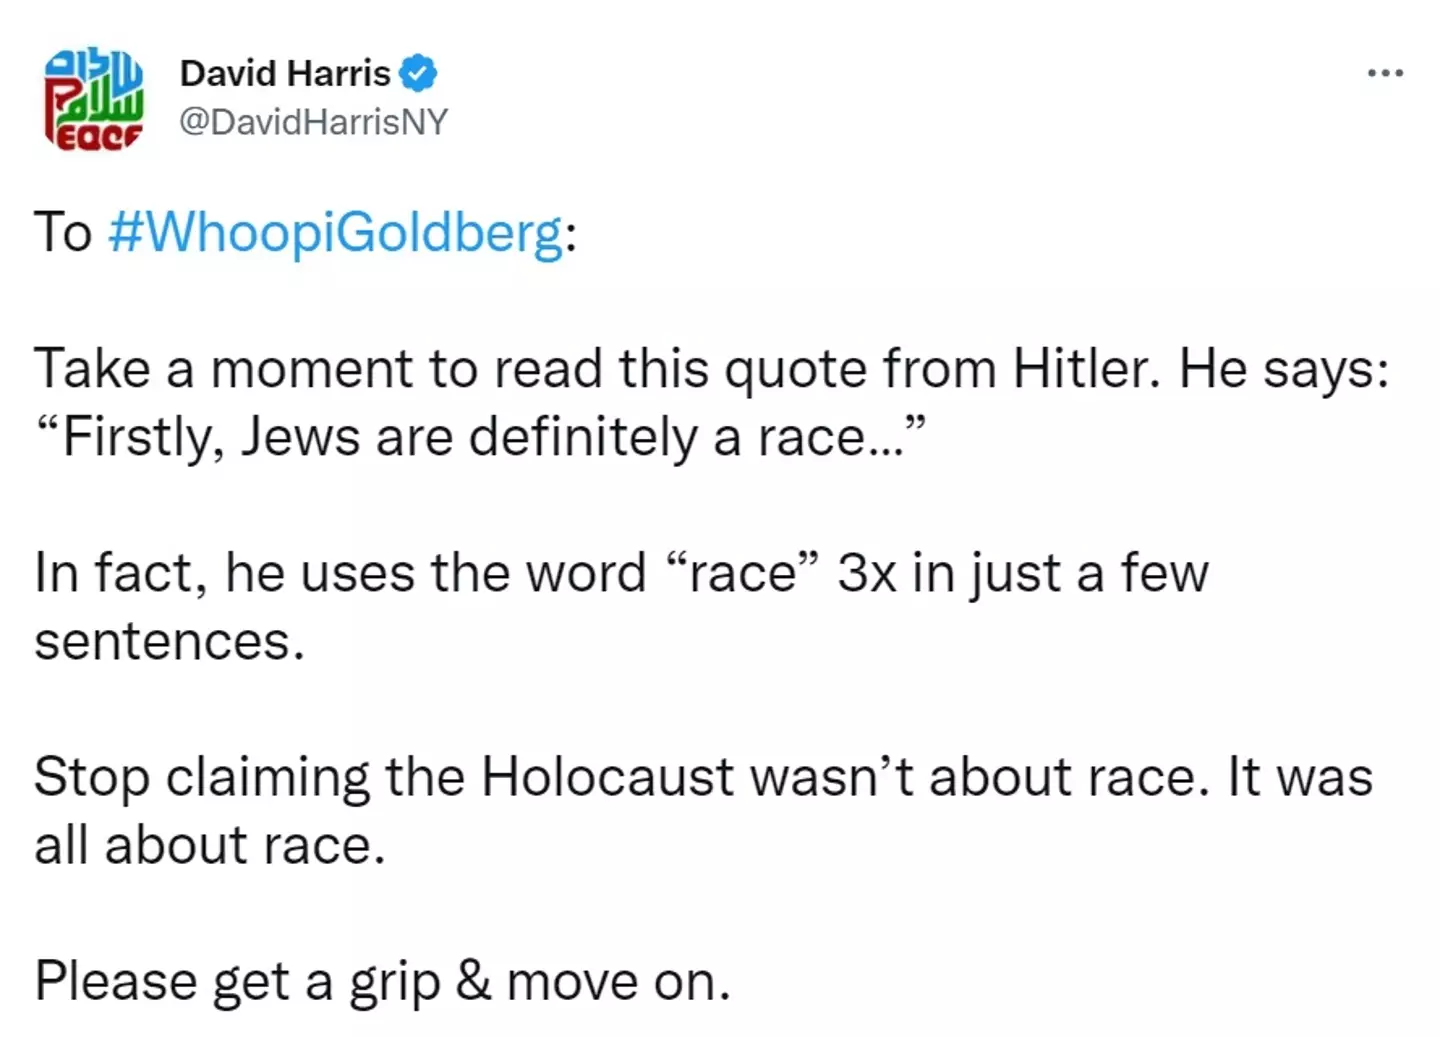 The CEO of the American Jewish Committee said Goldberg should 'stop claiming the Holocaust wasn't about race'.